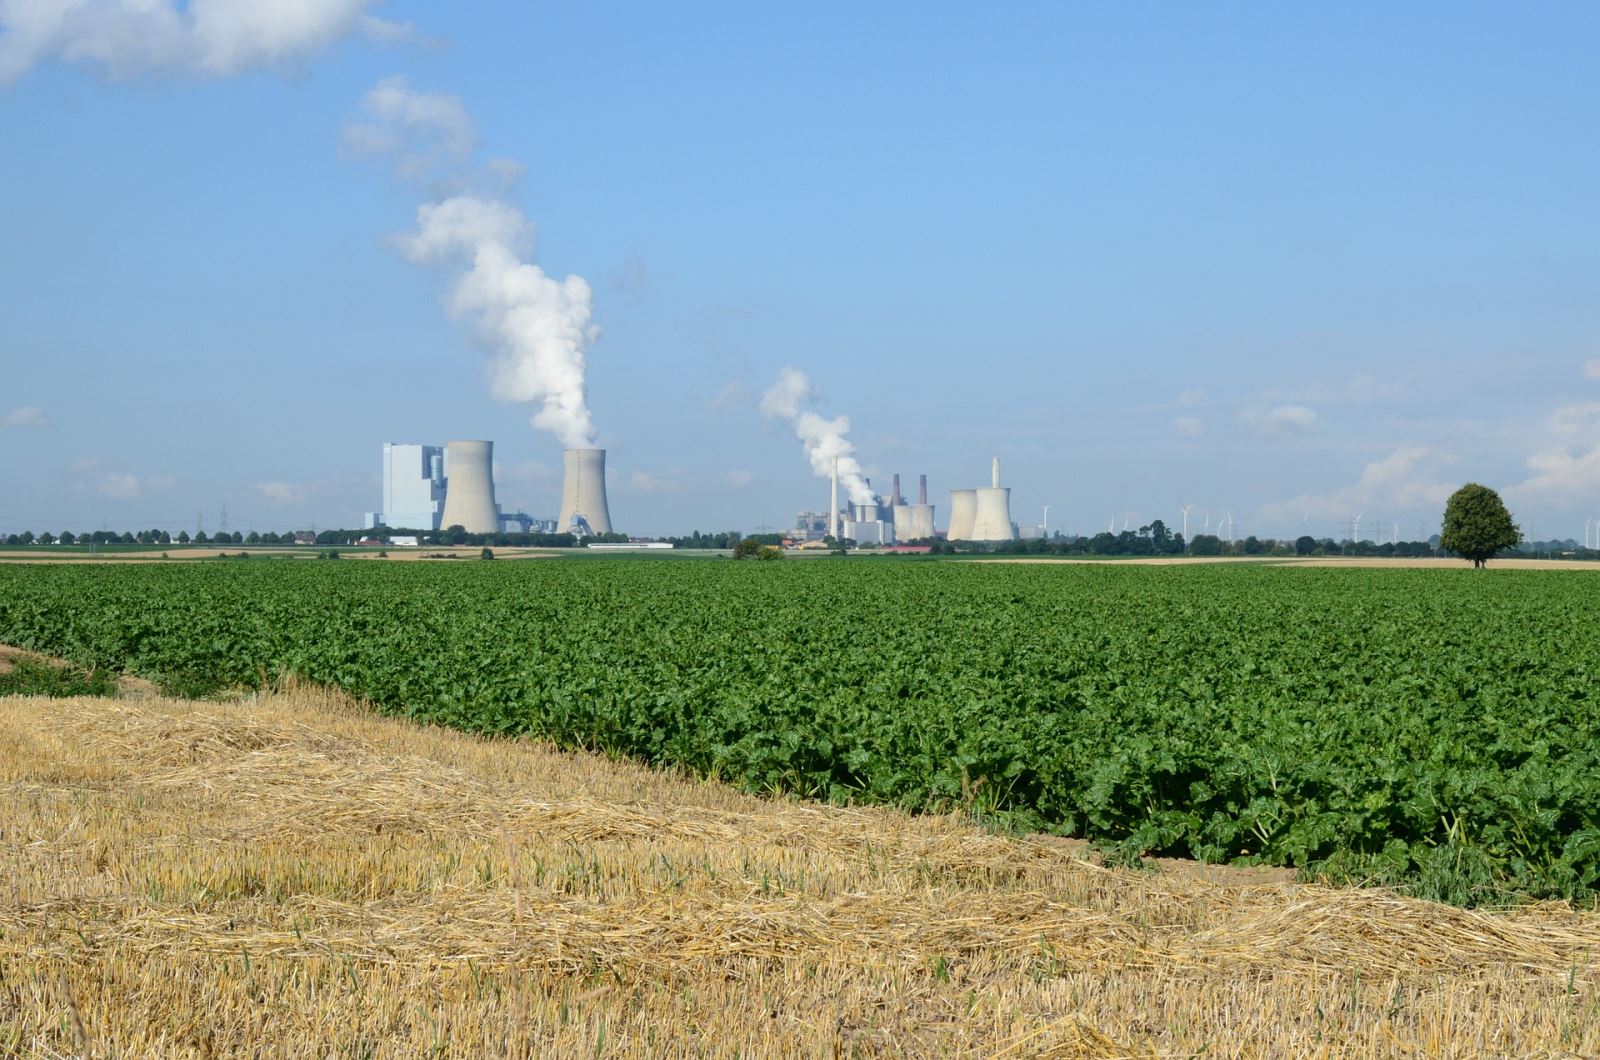 Crops with coal plant in the distance